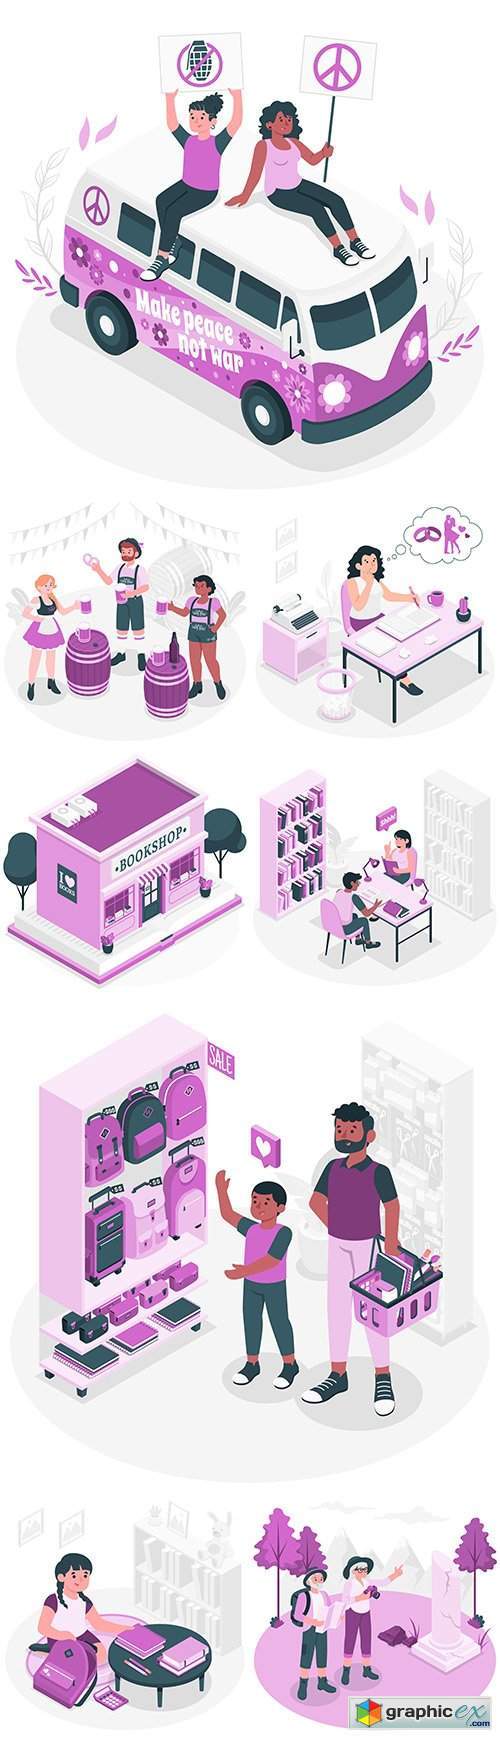 Lifestyle people in different professions illustrations isometric